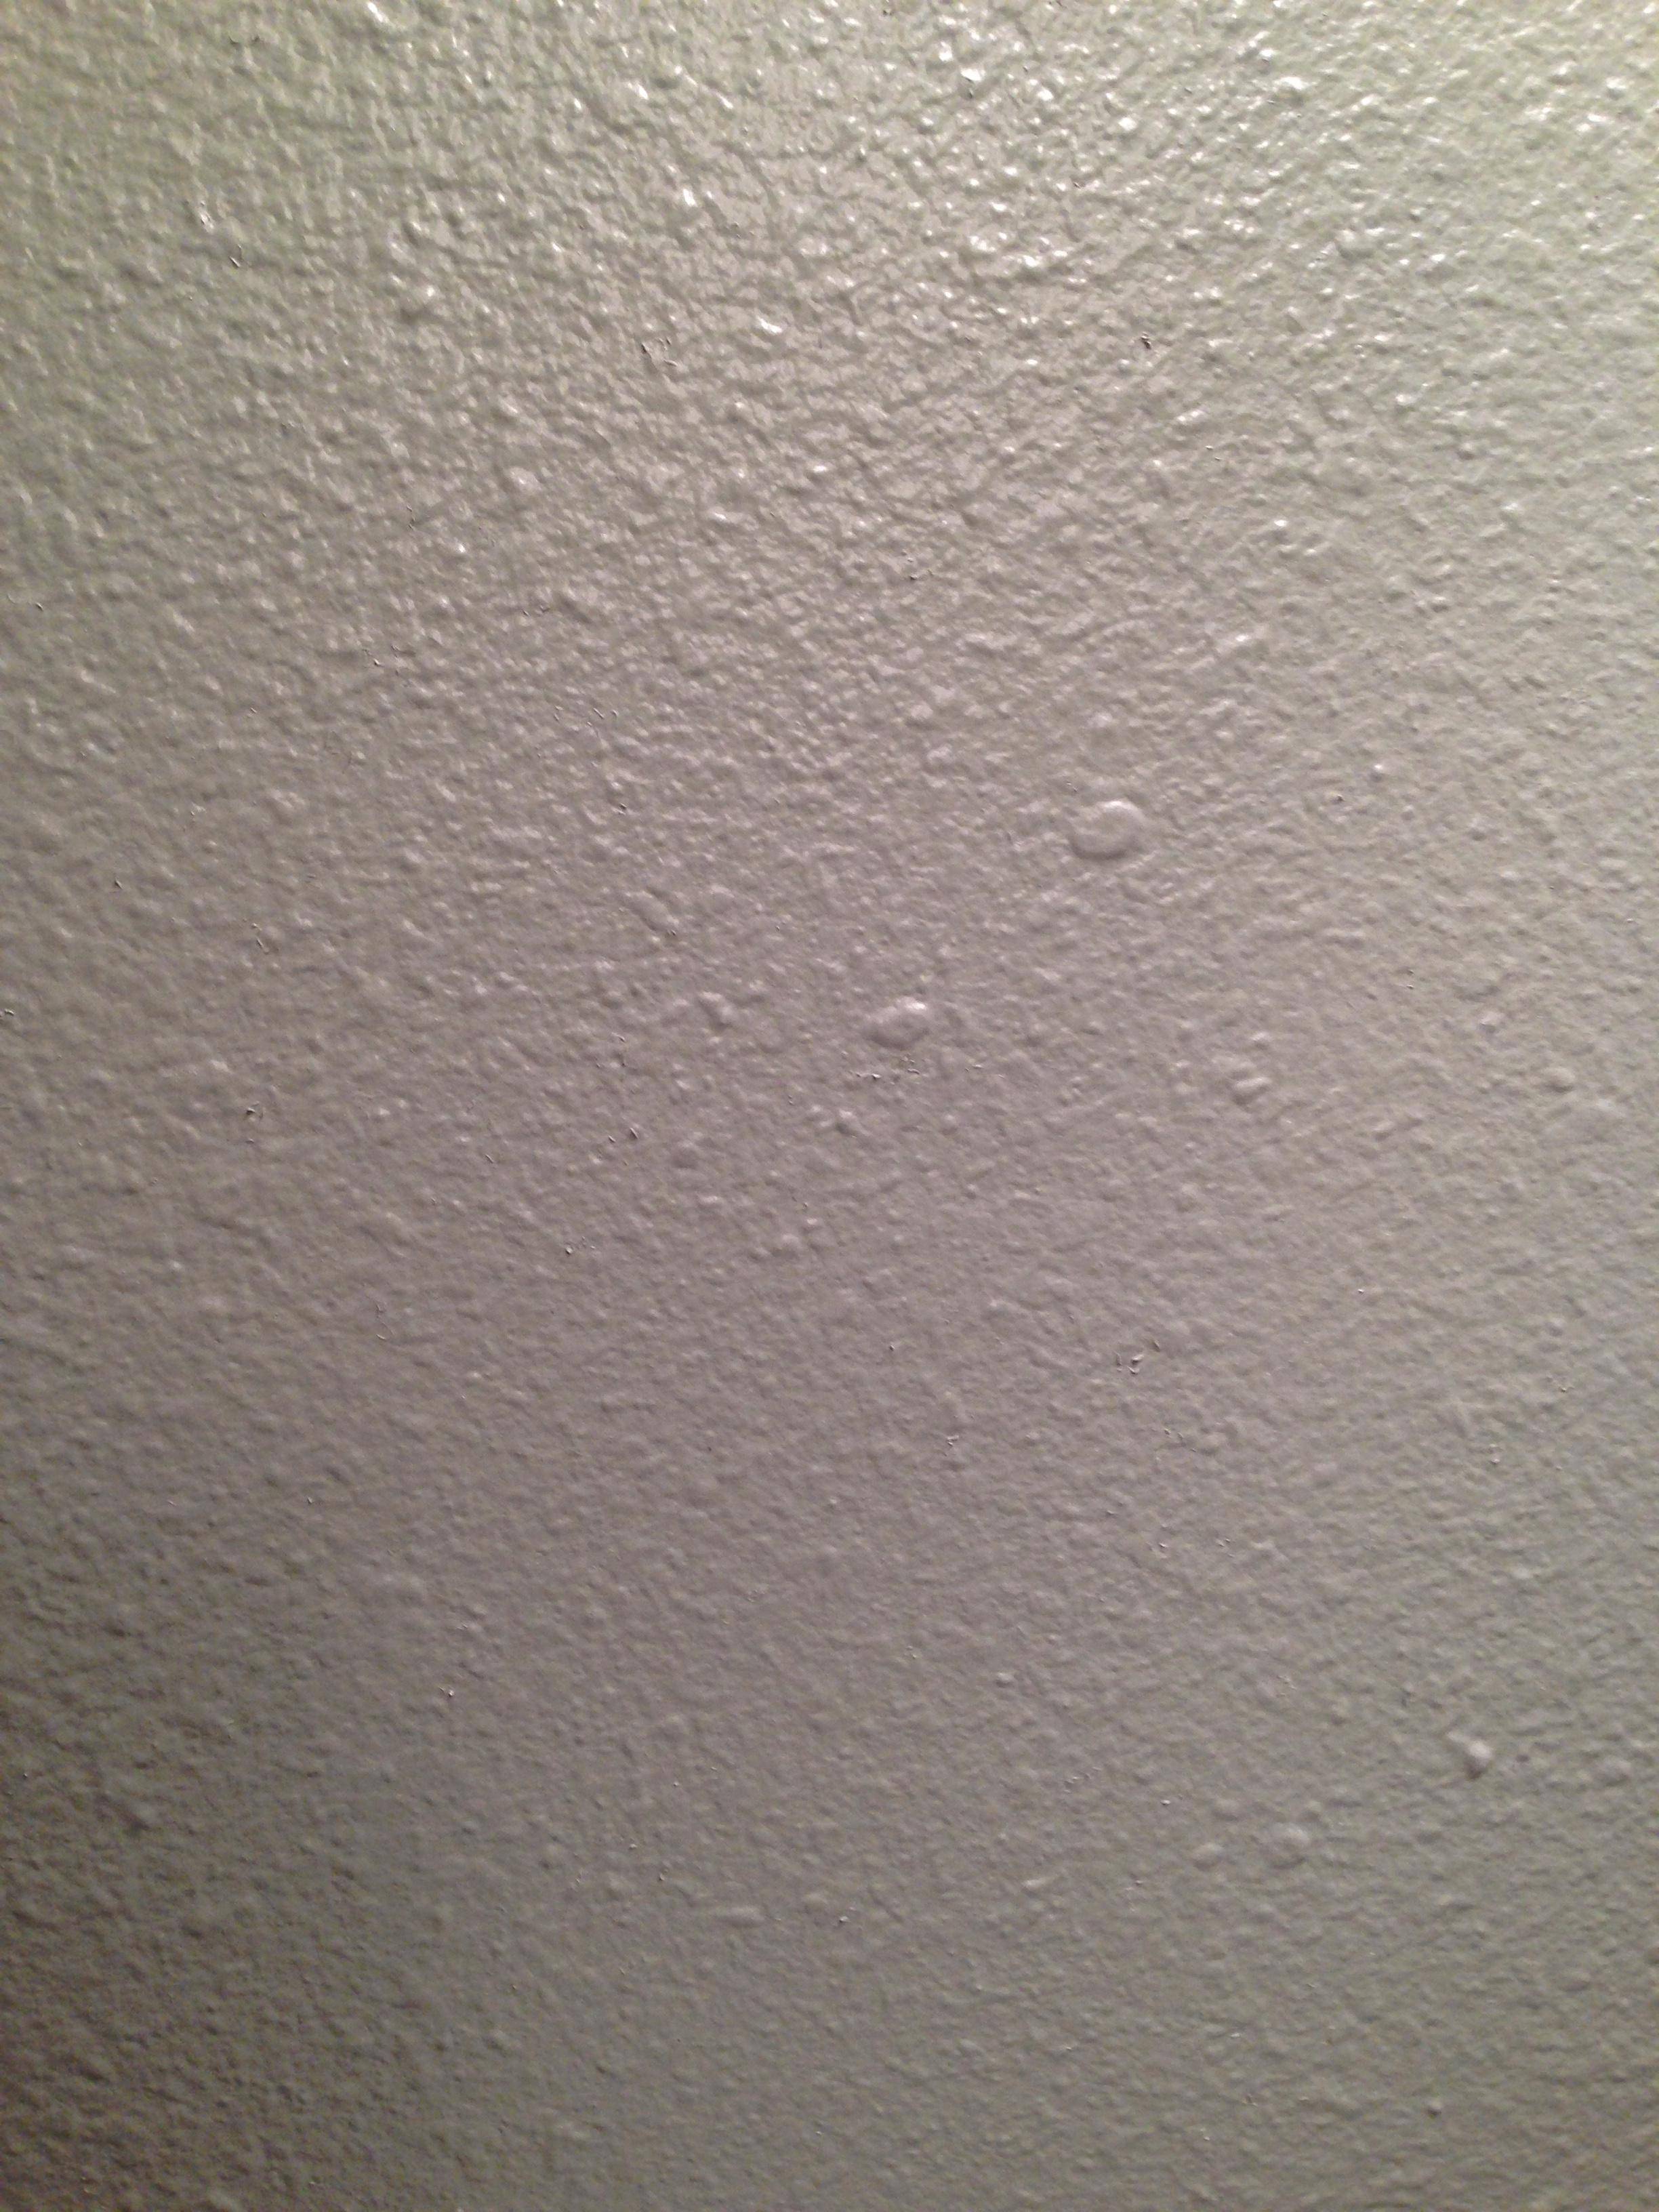 drywall - Help identifying type of texture on walls - Home ...